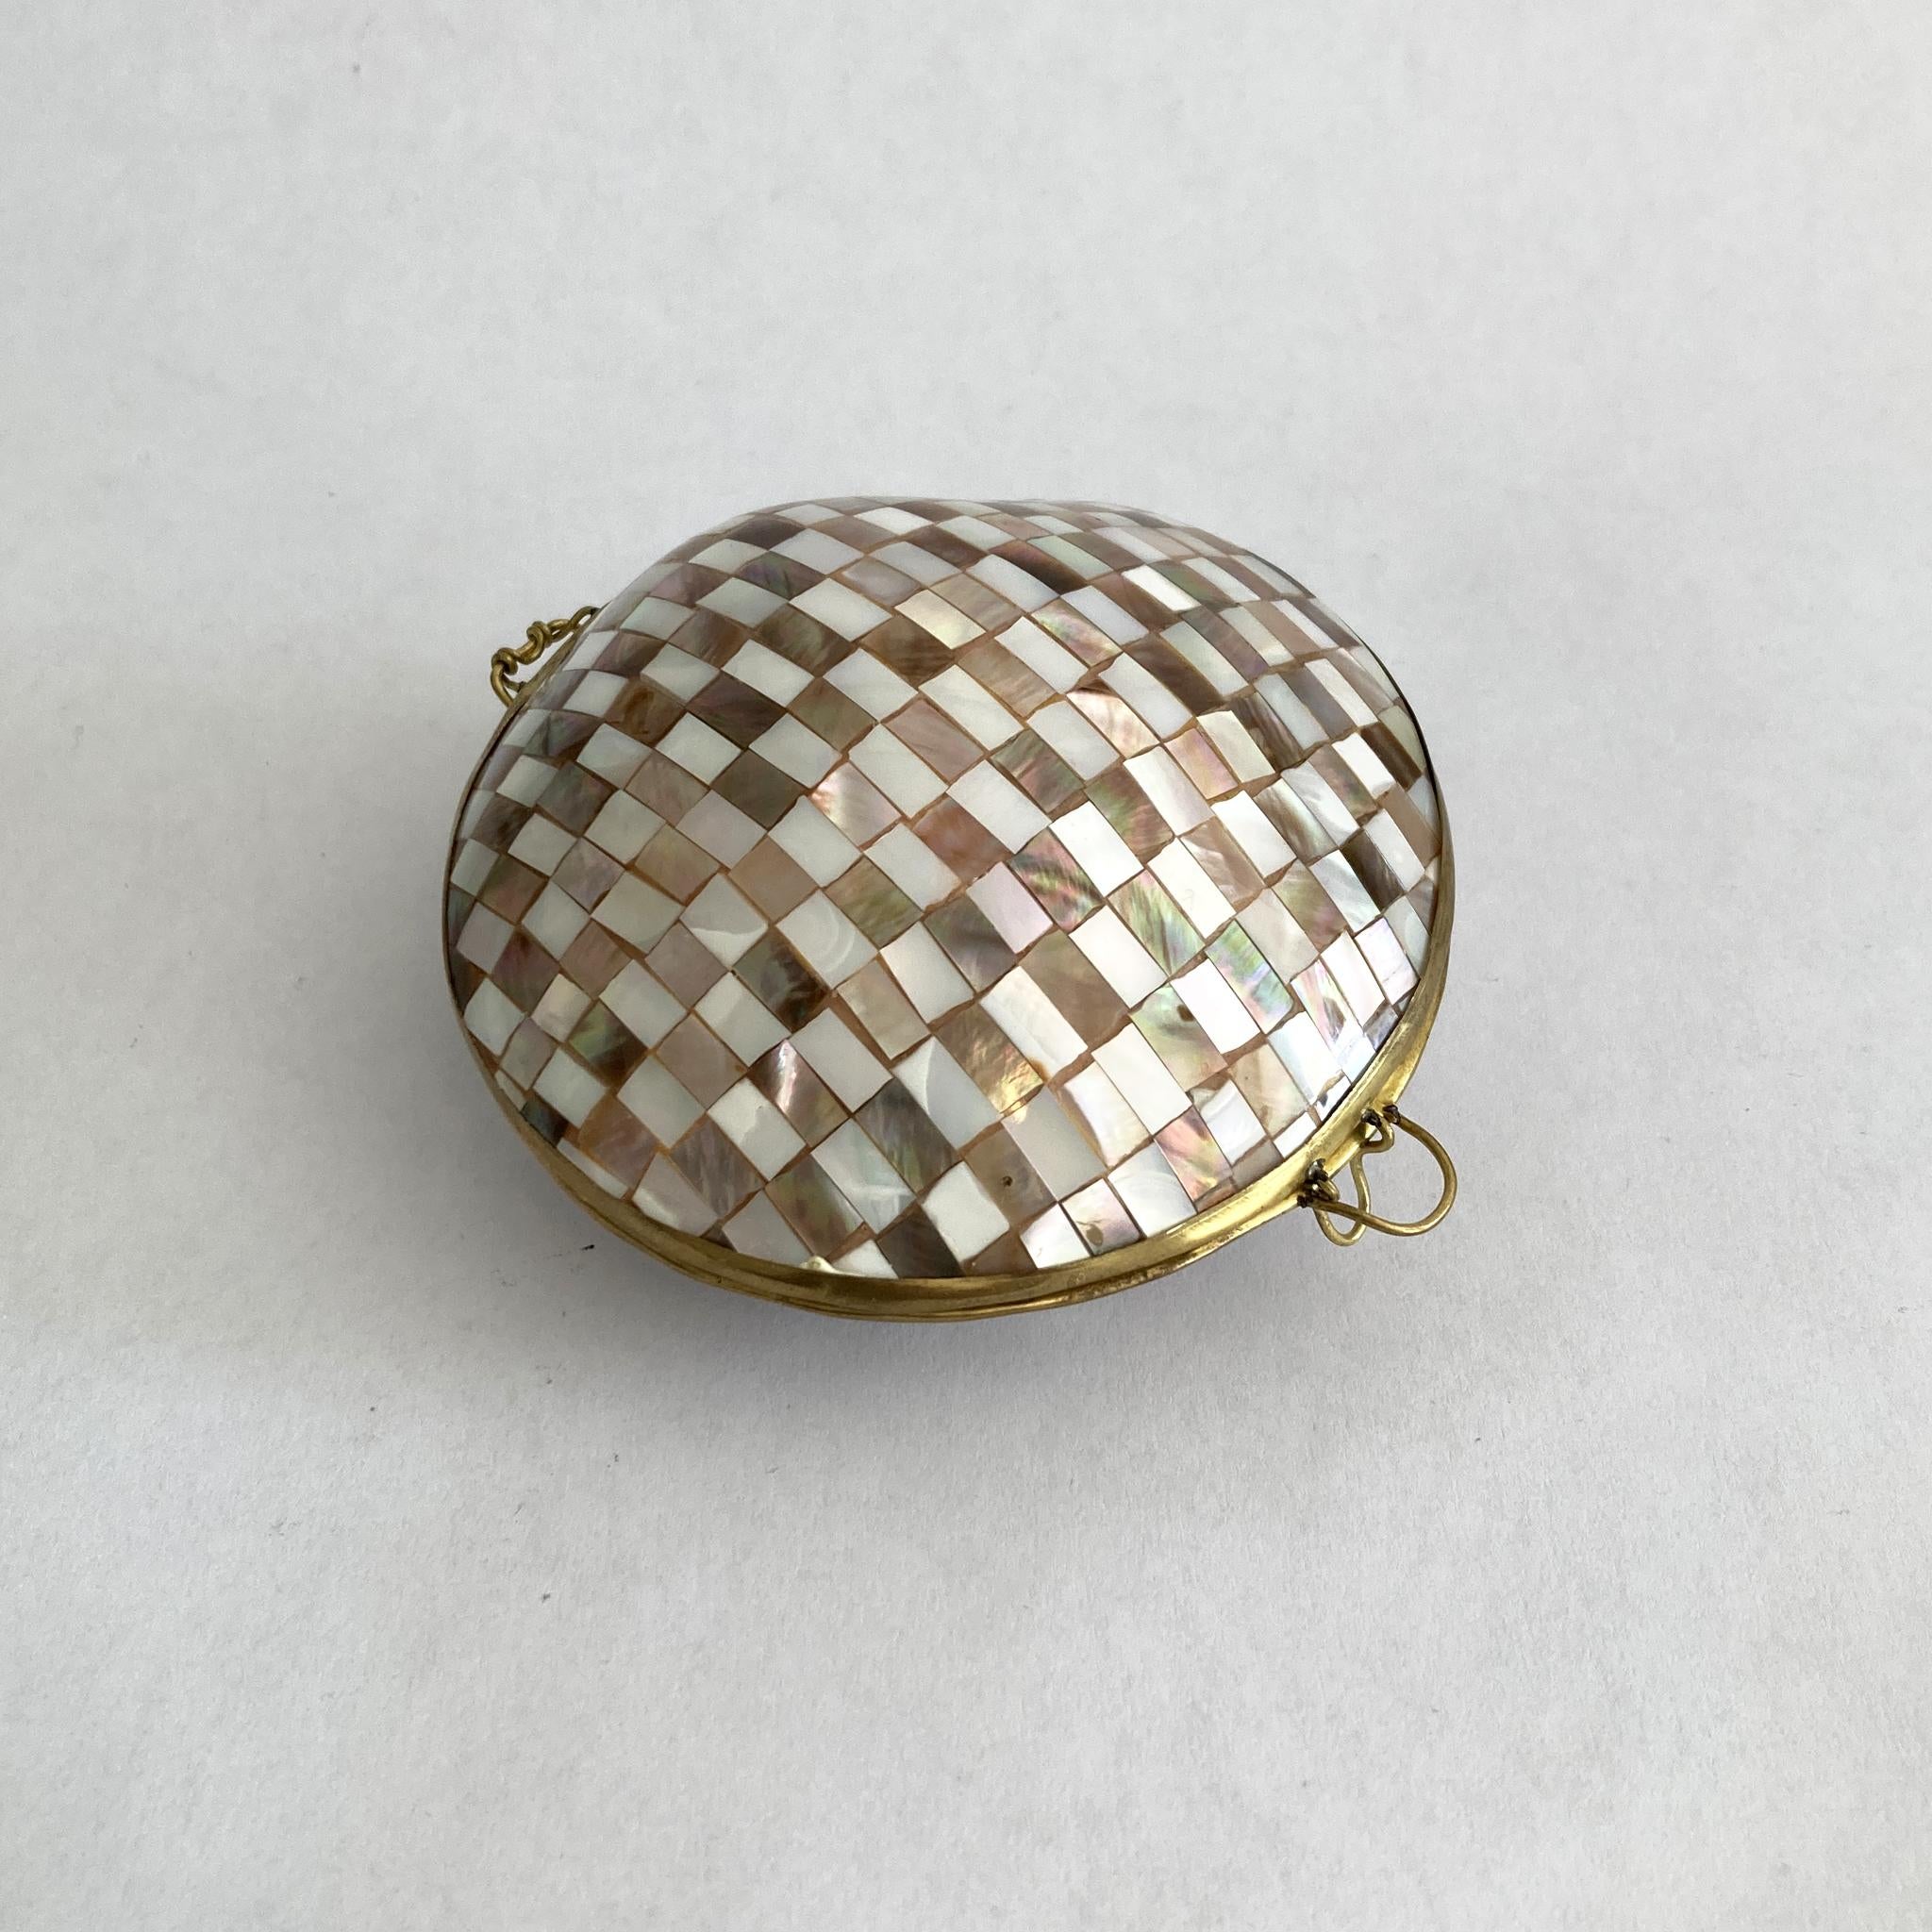 Beautiful, unique petite hinged shell box. This is a real shell covered in mother of pearl and made into a hinged box, charming. The checkerboard pattern of the mosaic contrasts beautifully with the brass hardware. This piece looks great as part of